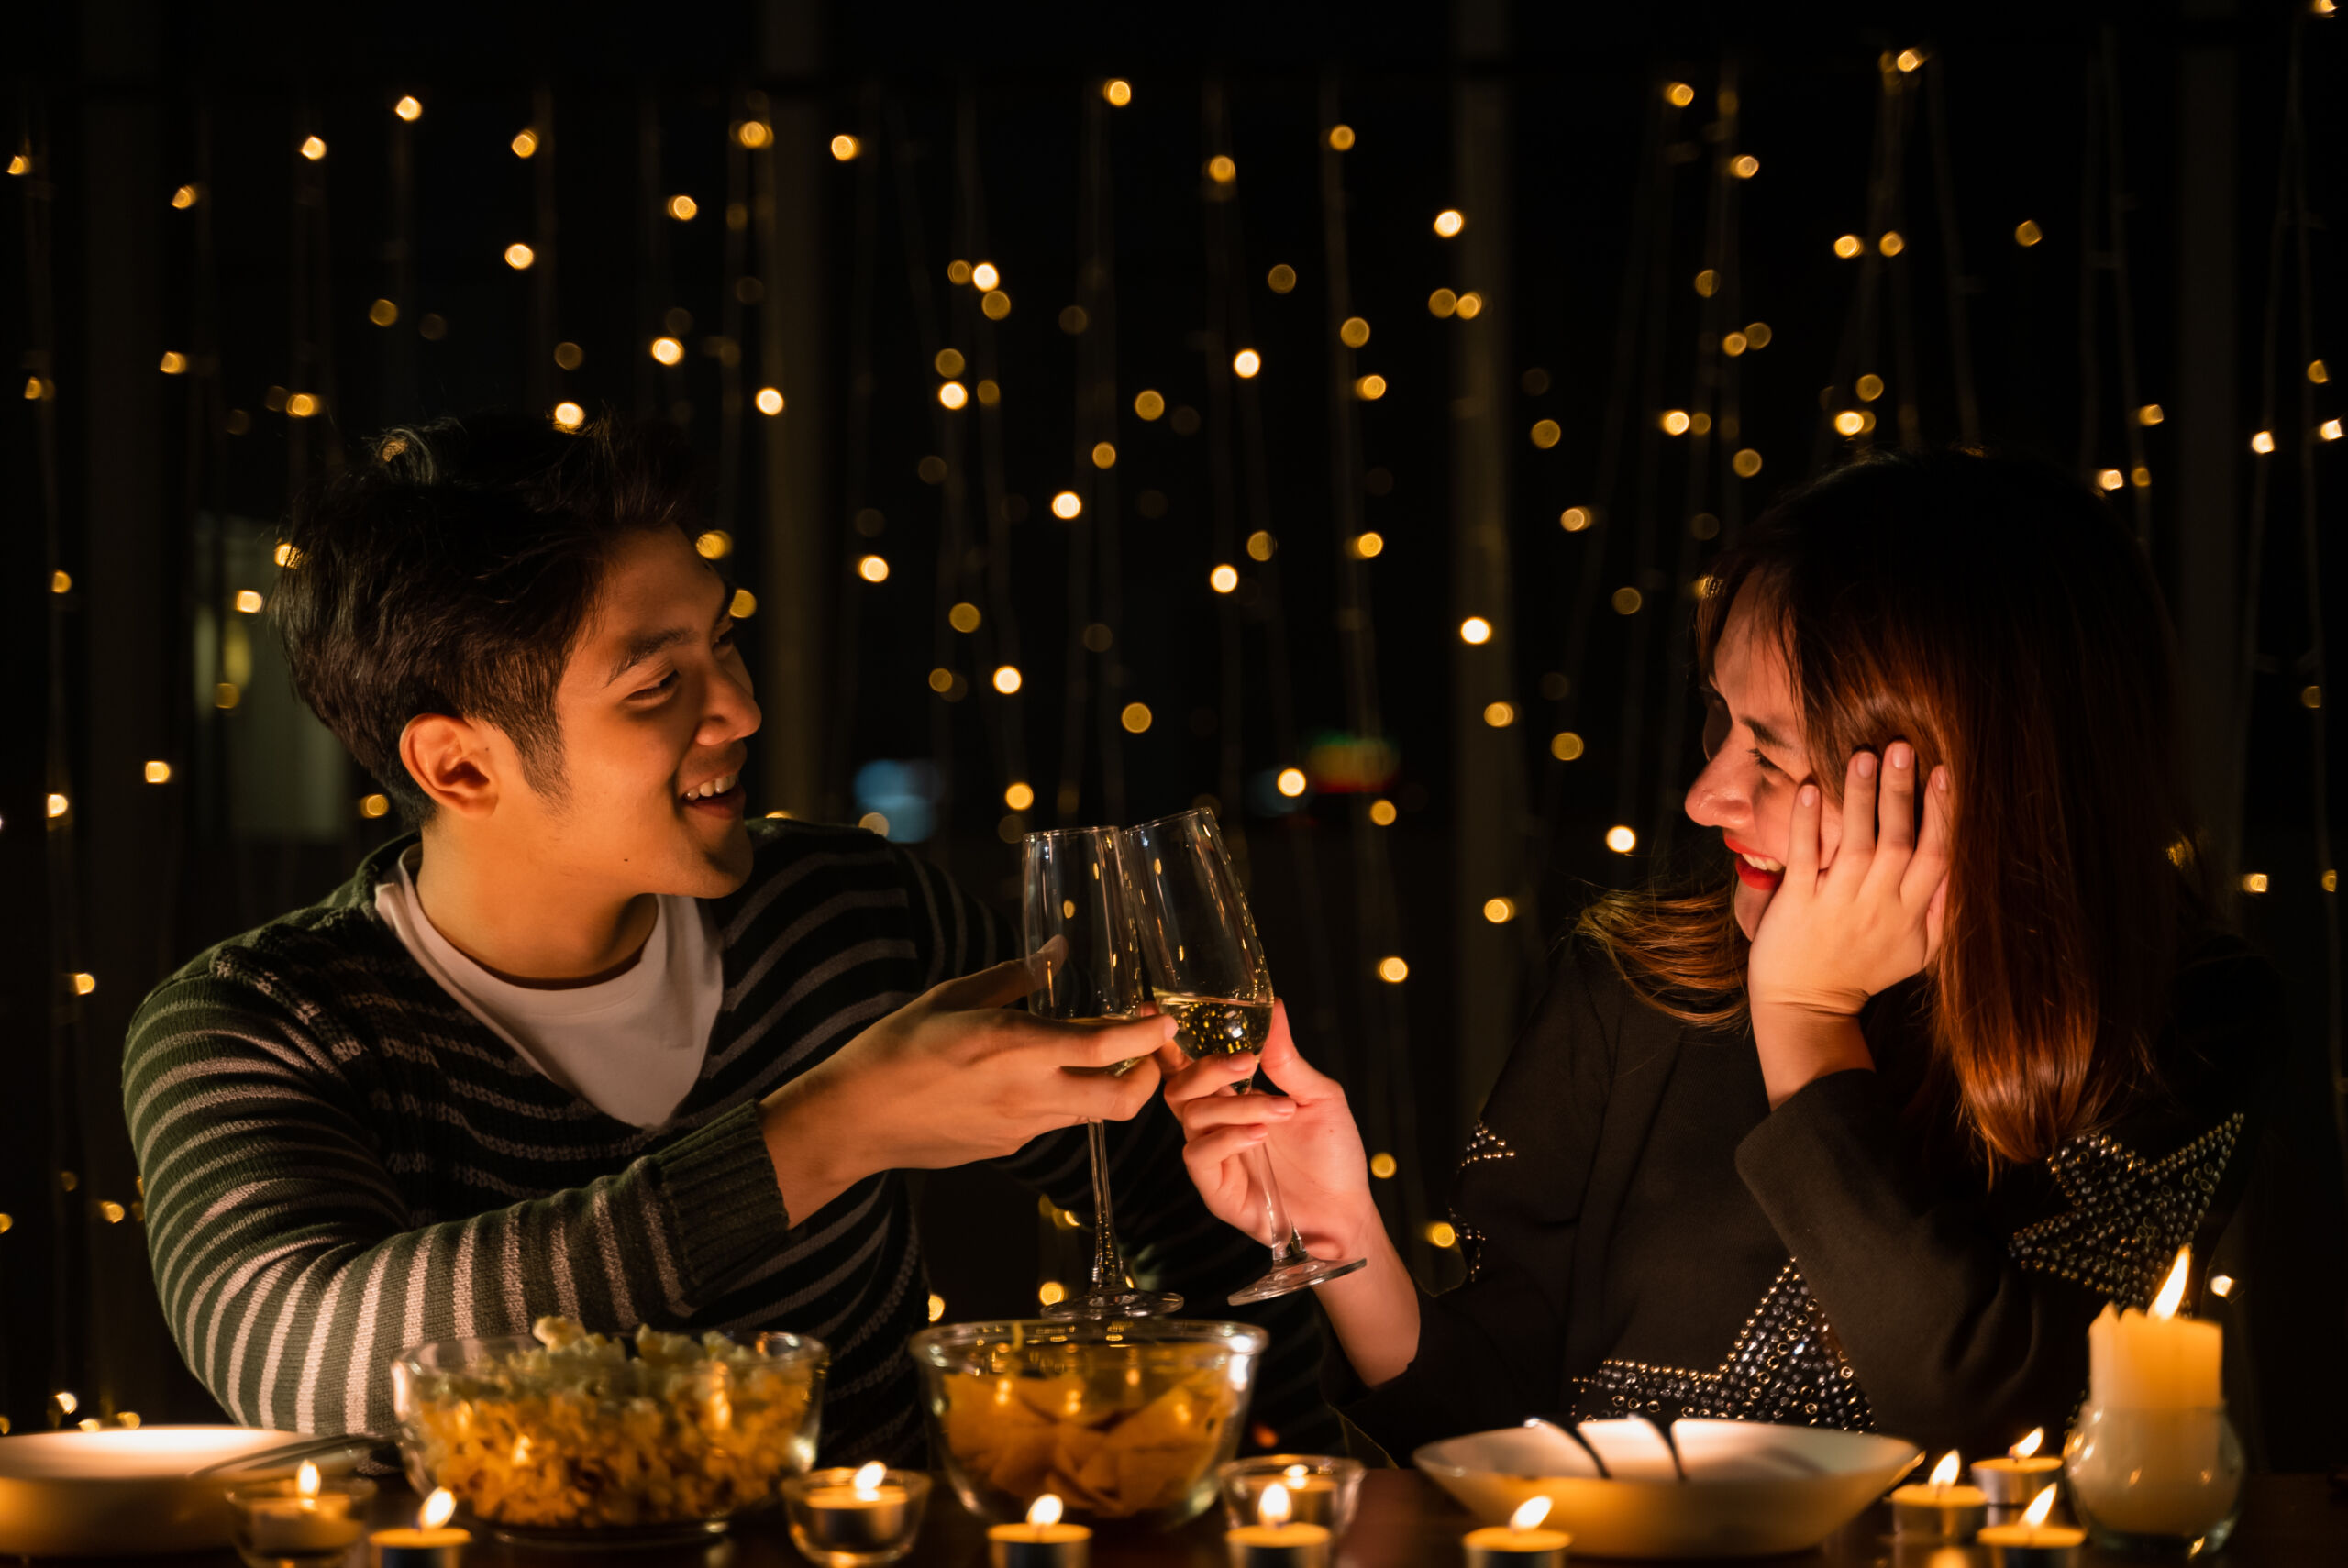 Couple toasting with wine in romantic candlelit setting.